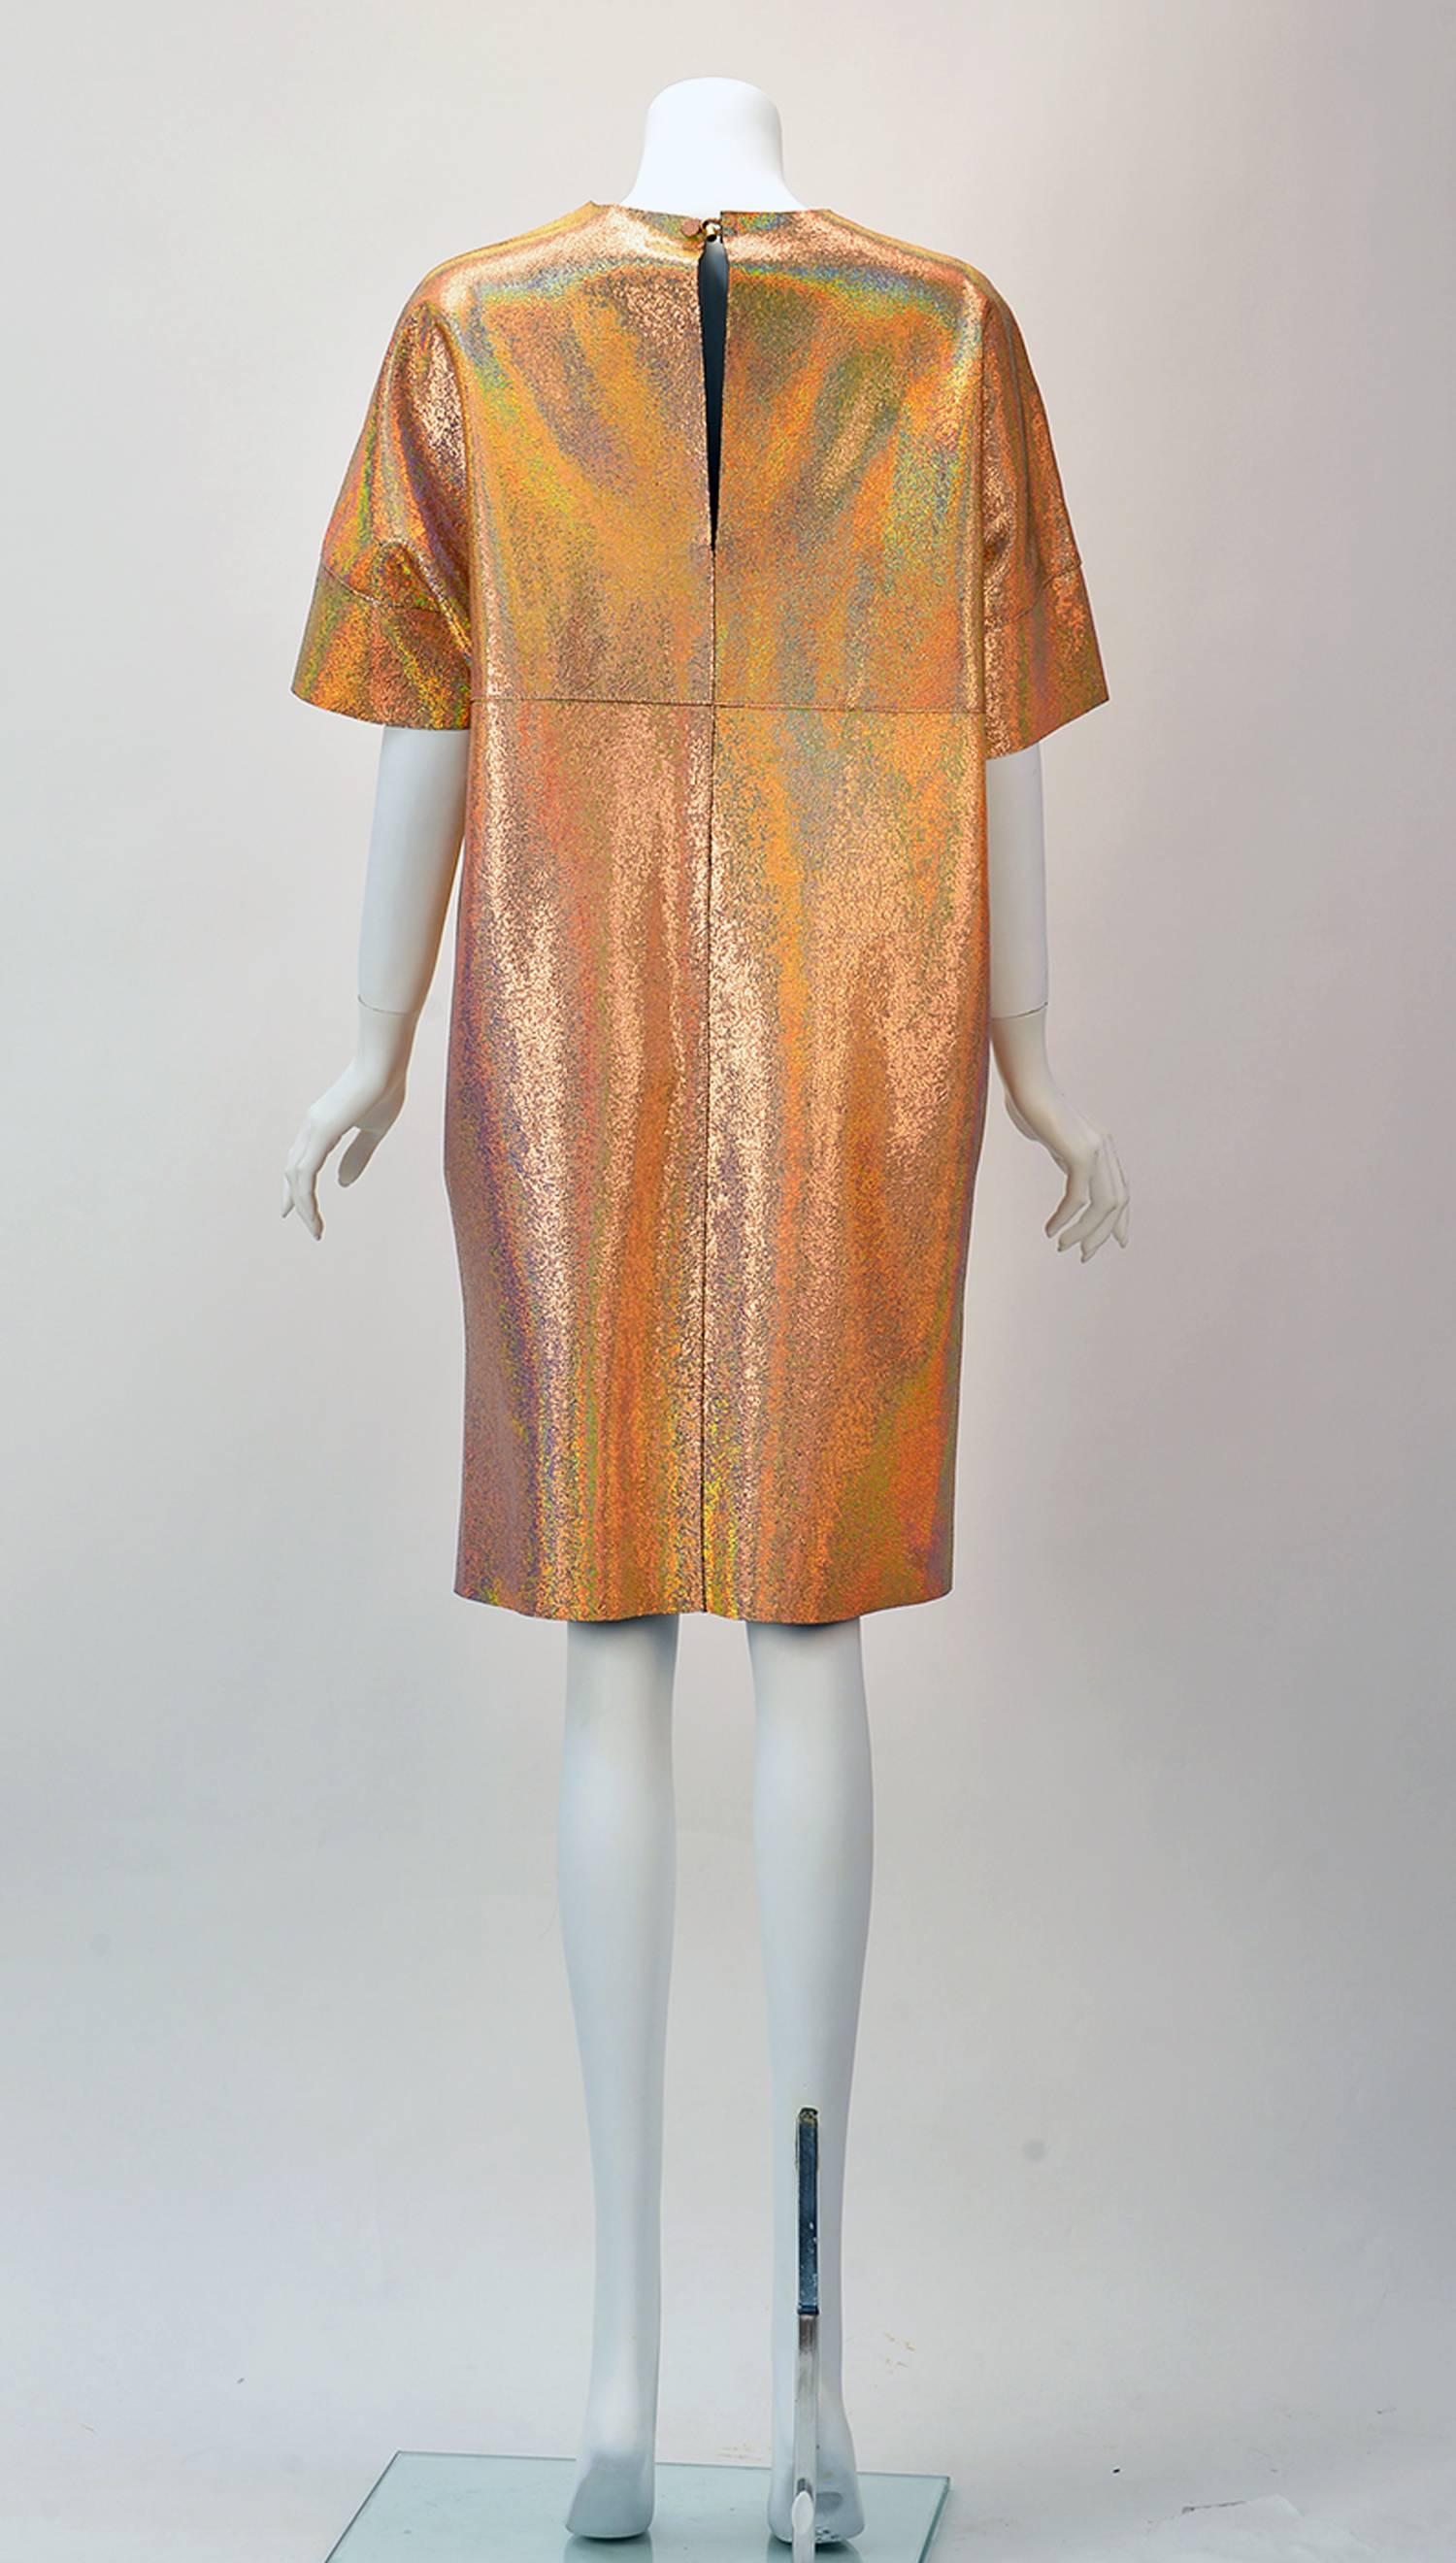 This Vera Pelle/Leather shift dress aesthetically stands alone; both dramatic and fun!
The dress of Hologram Vera Pelle/Leather is thoughtfully constructed with overlapping seams.  The fabric glimmers a pinky/peach/purple with silver and gold.